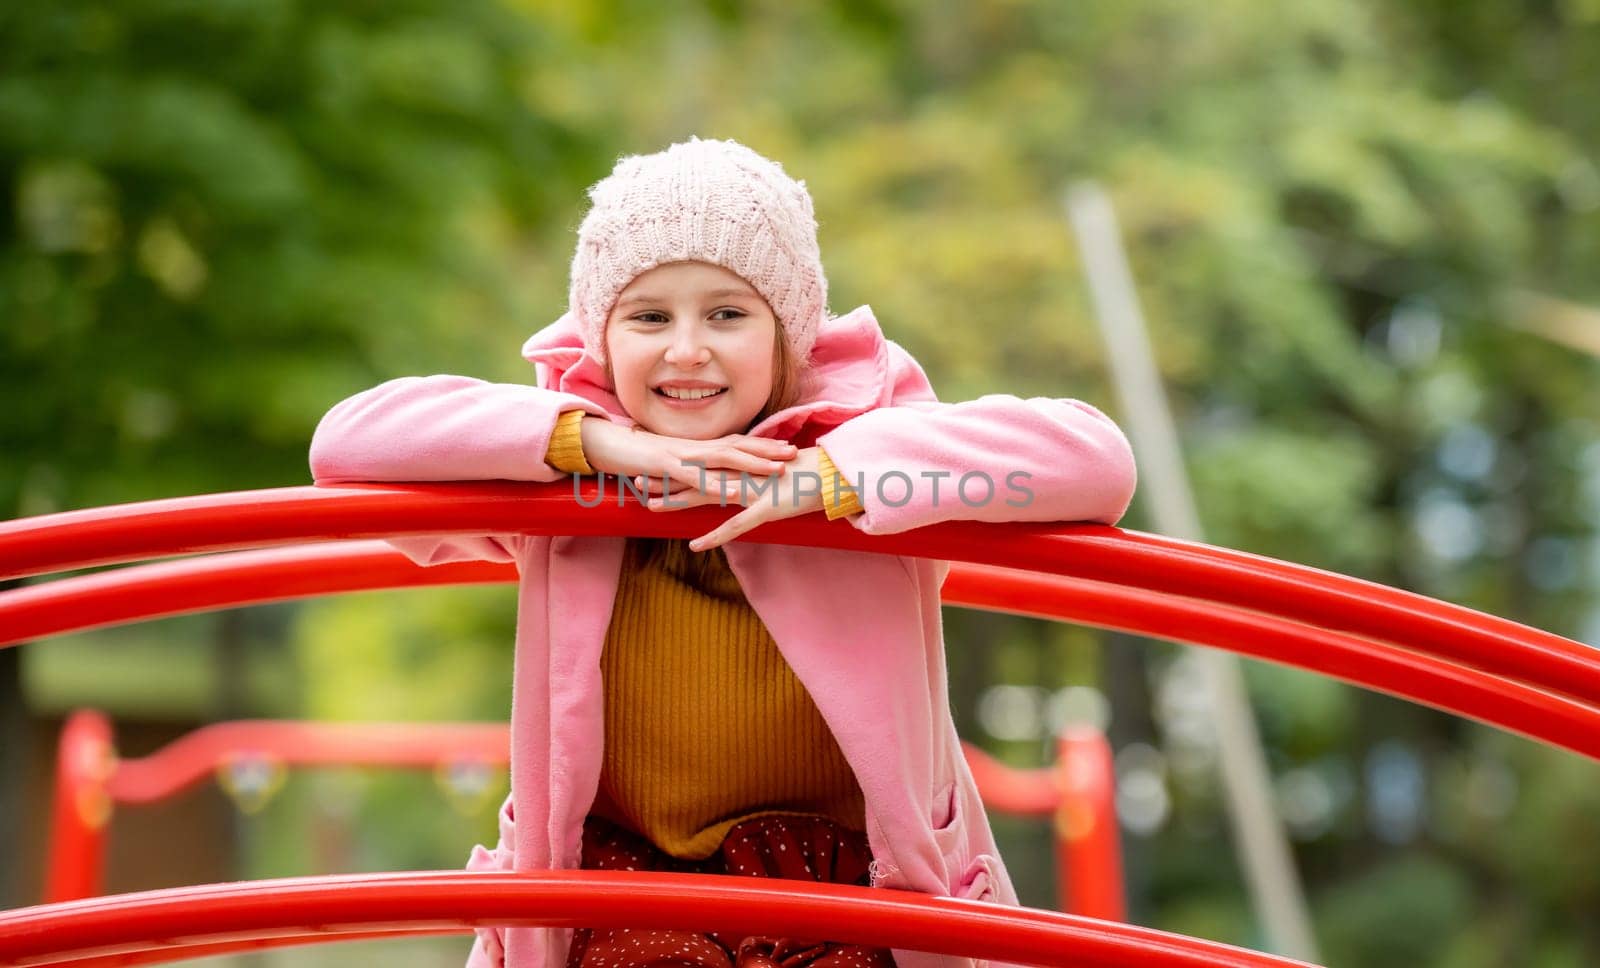 Pretty girl kid standing on playground at autumn day outdoors and daydreaming. Female child happy portrait